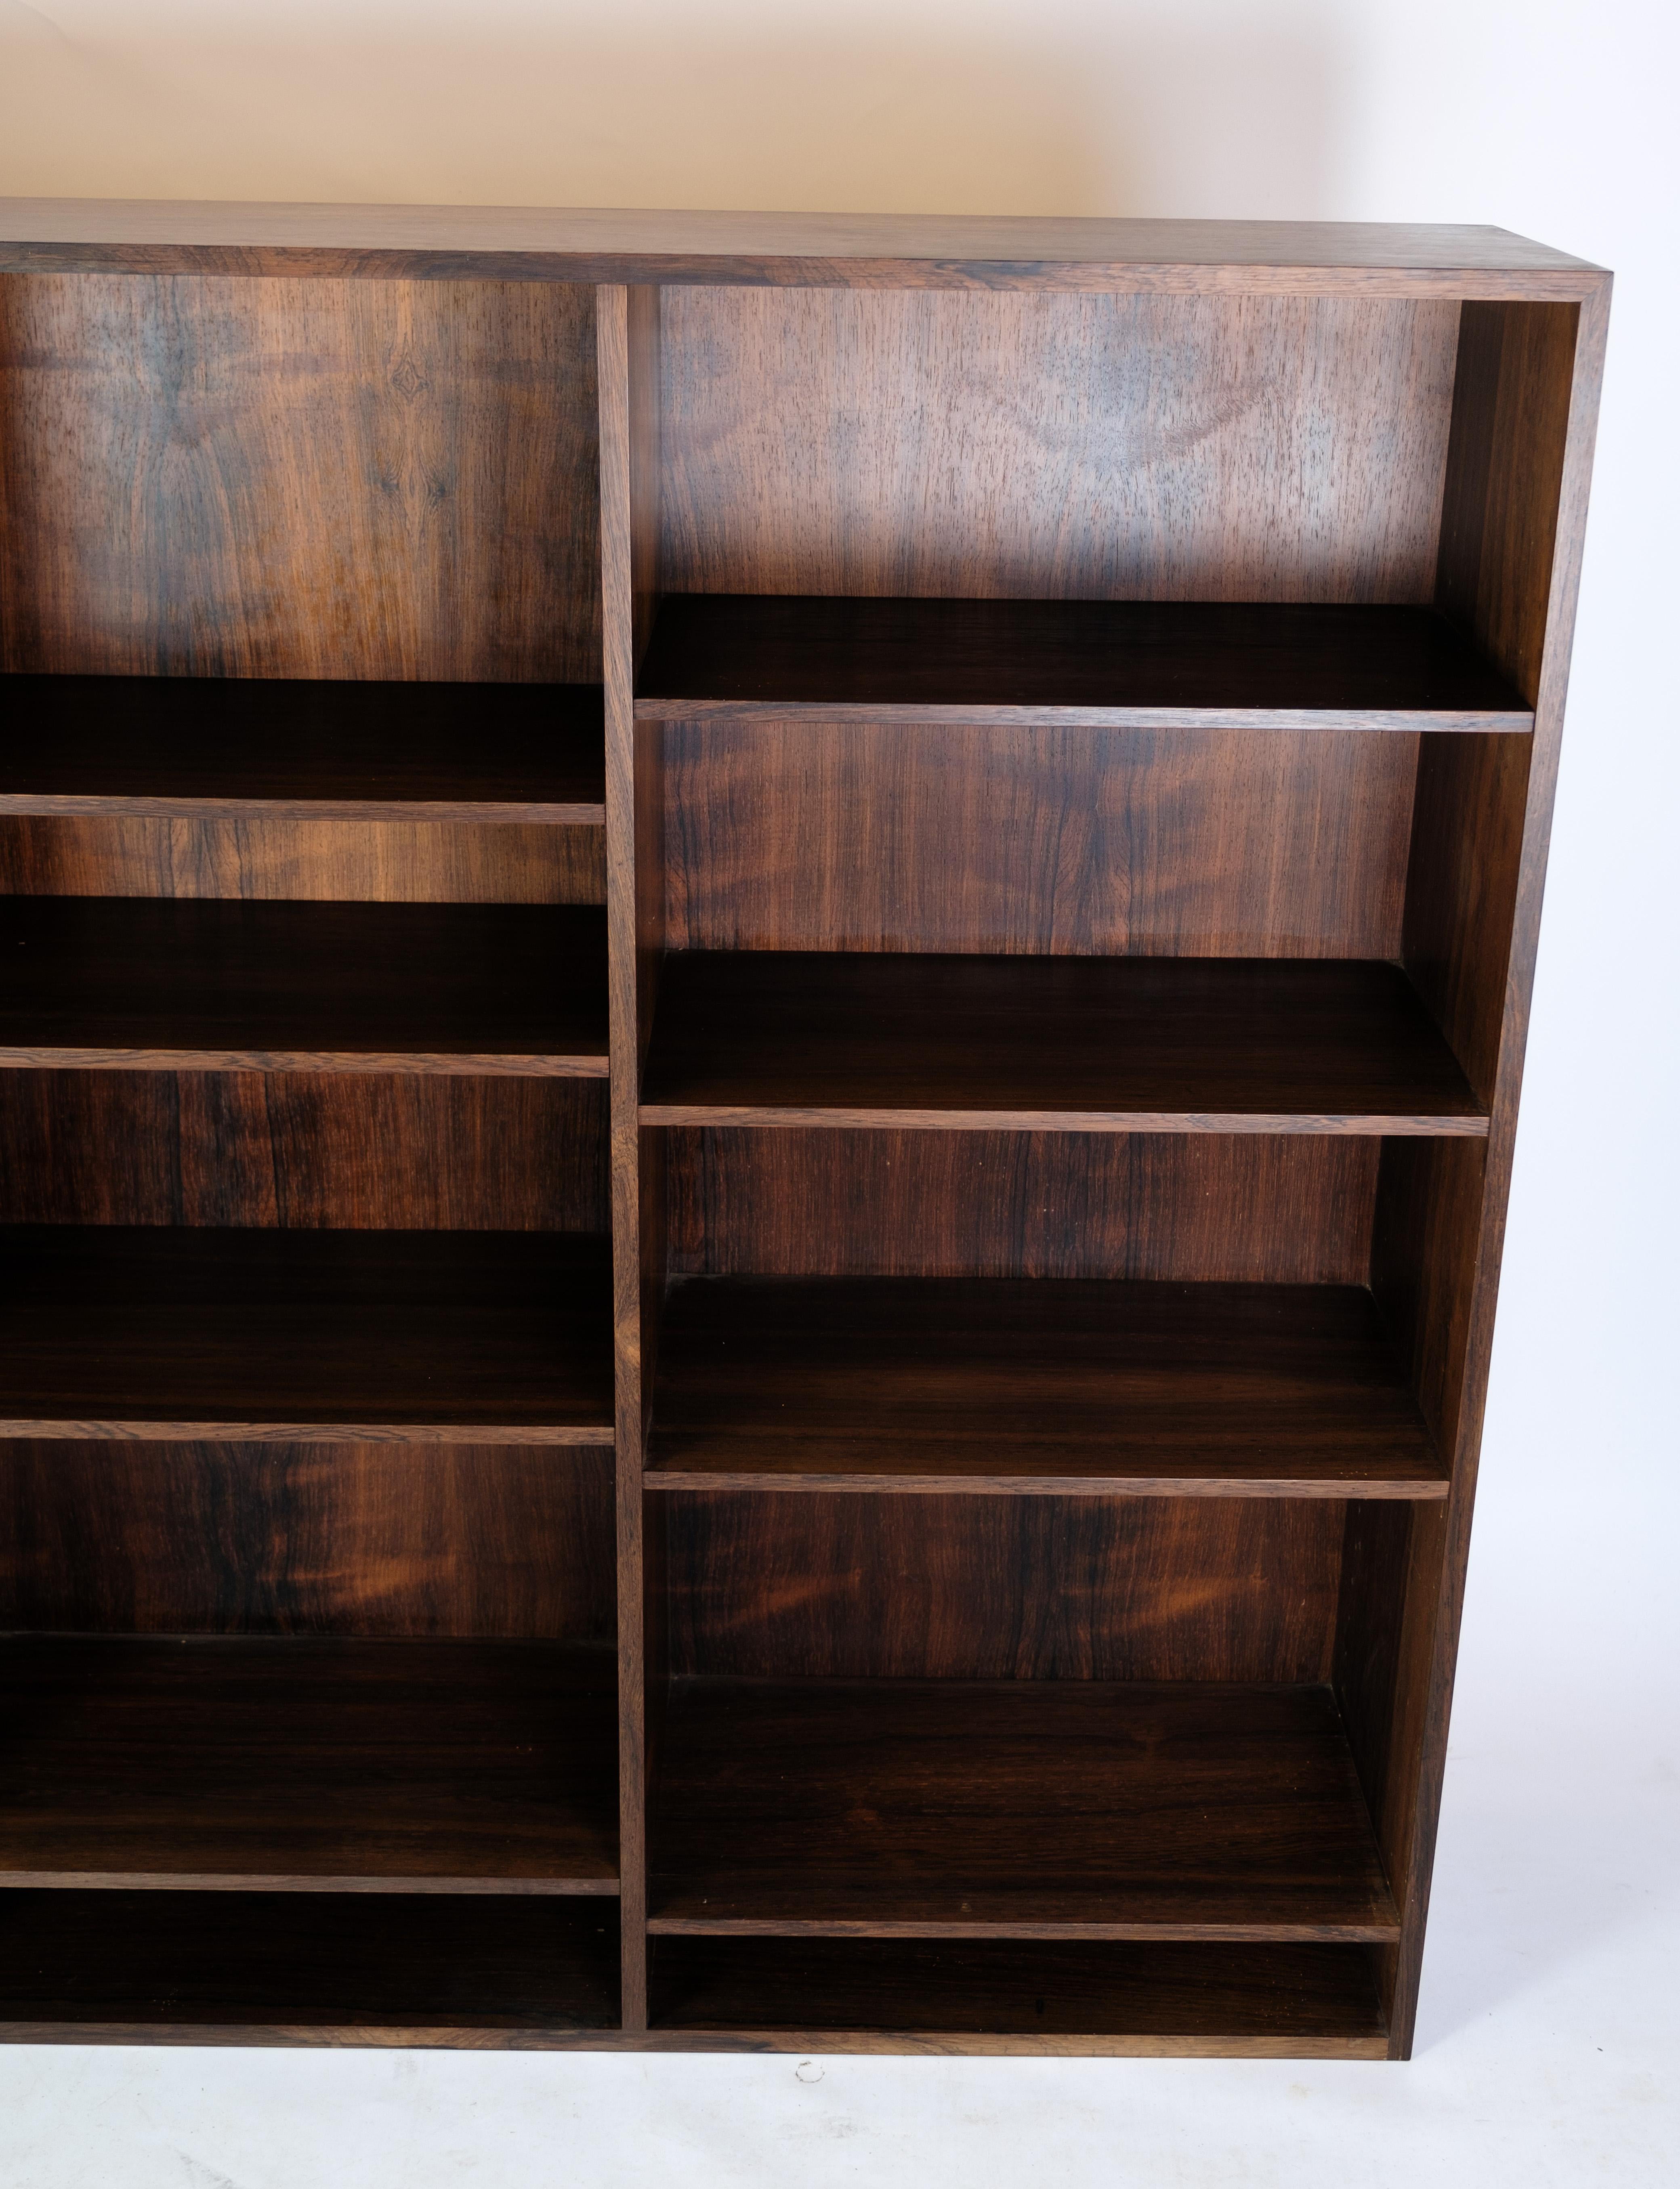 Large bookcase with shelves made of rosewood by Dansk Design from around the 1960s.
Measurements in cm: H:123 W:164 D:30